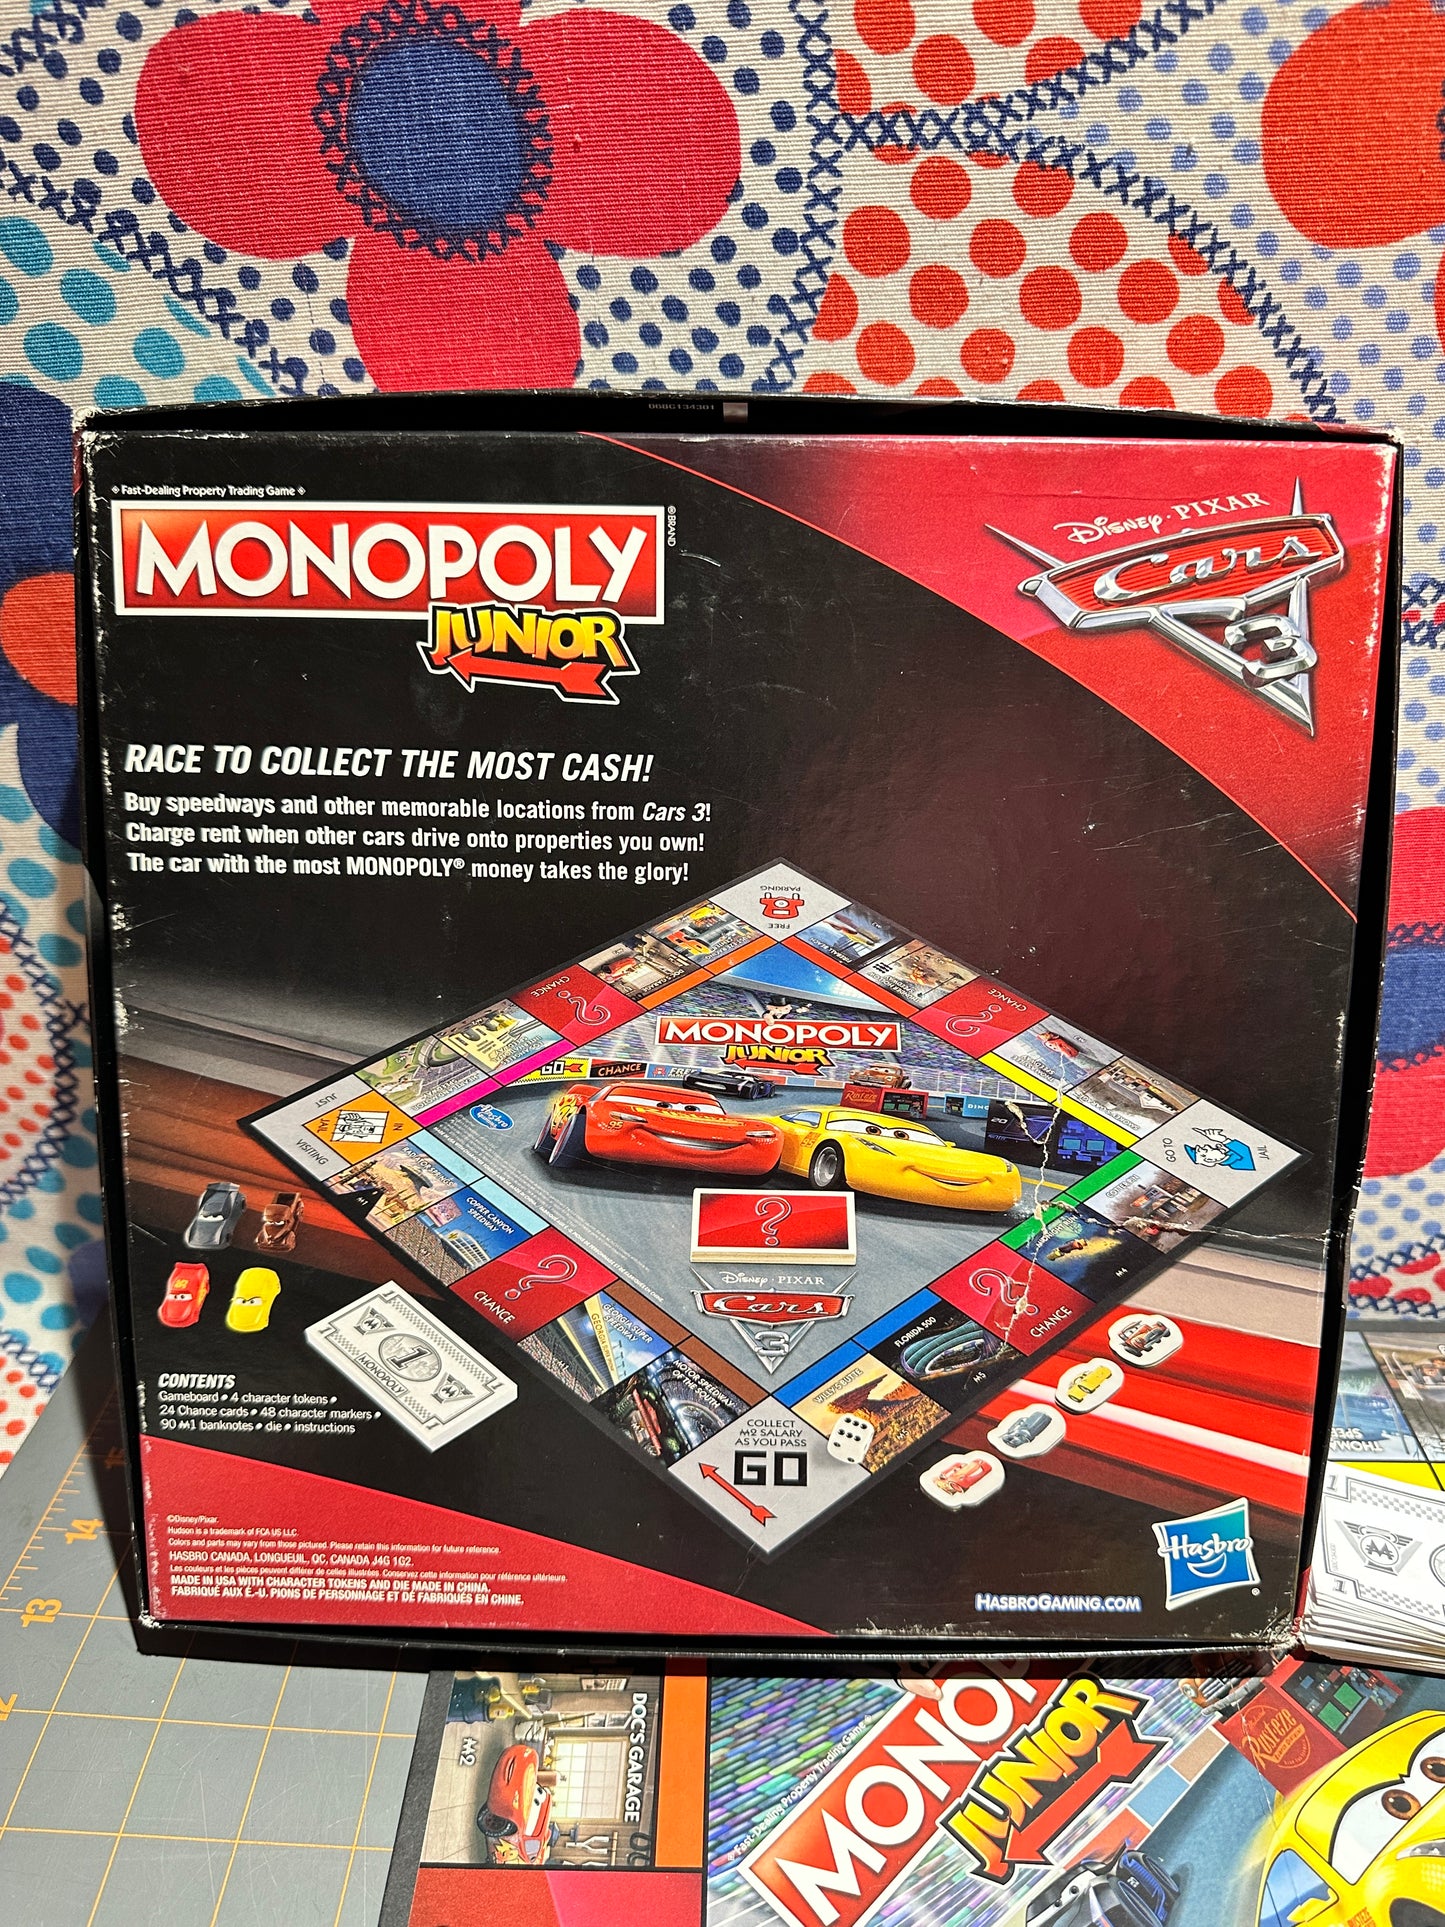 Monopoly Junior, CARS, 2015 Hasbro Parker Brothers Board Game, Complete